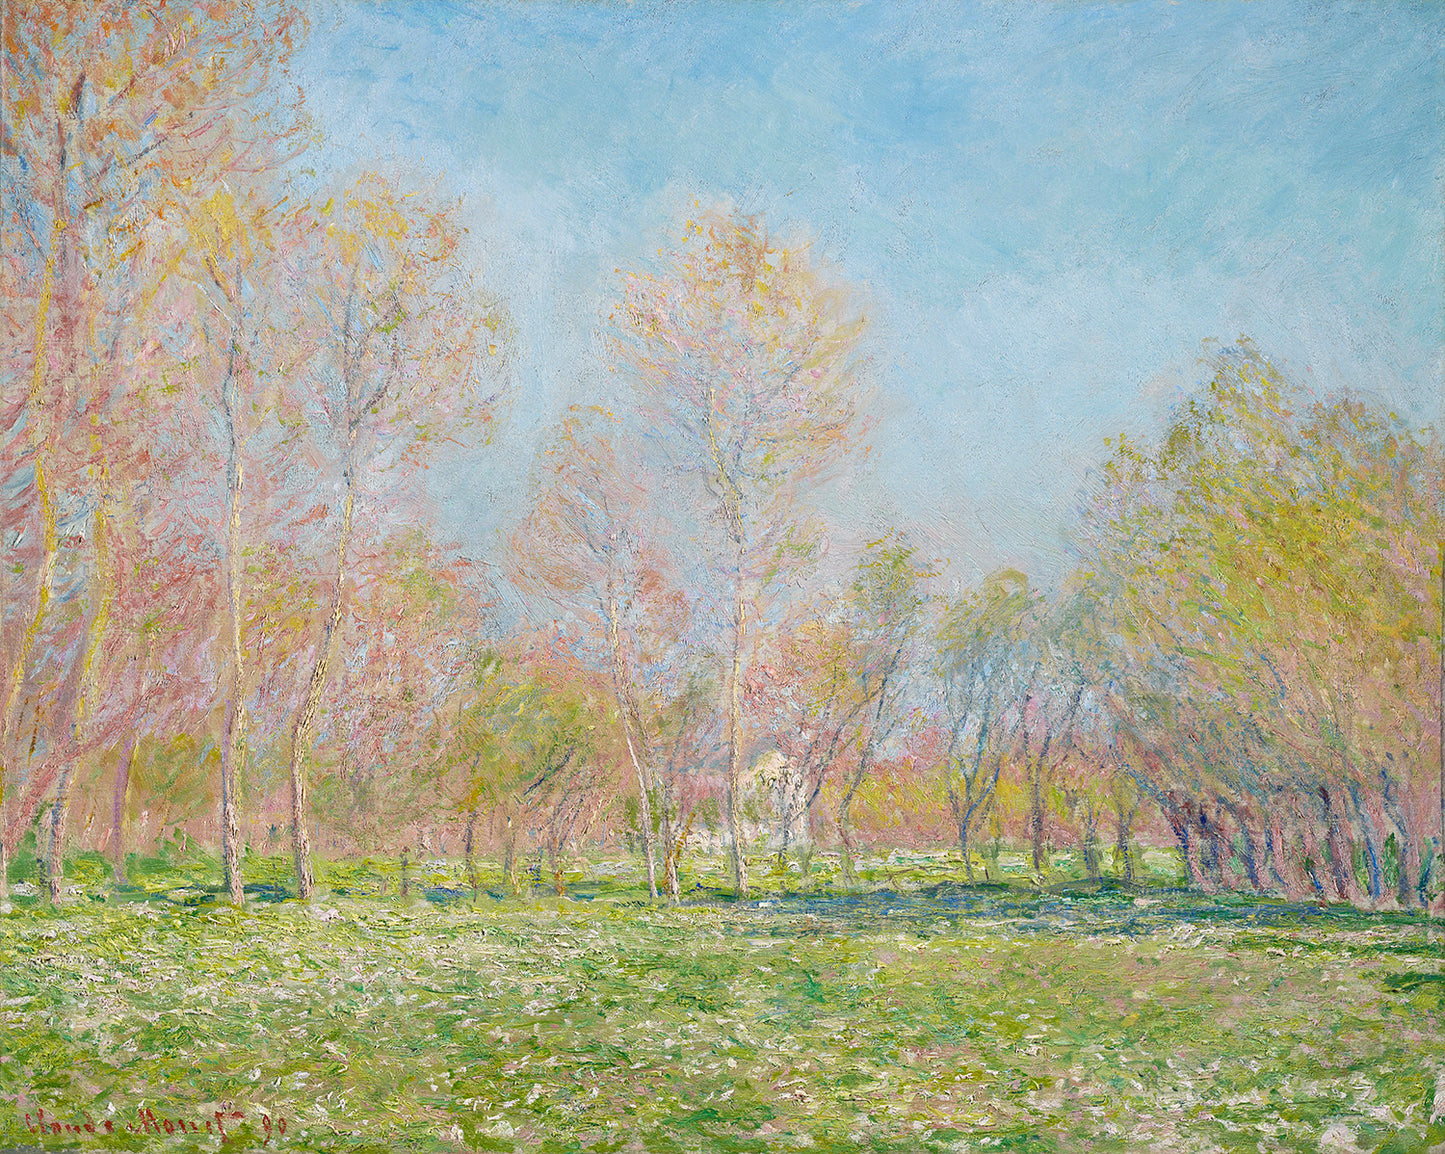 Spring in Giverny by Claude Monet